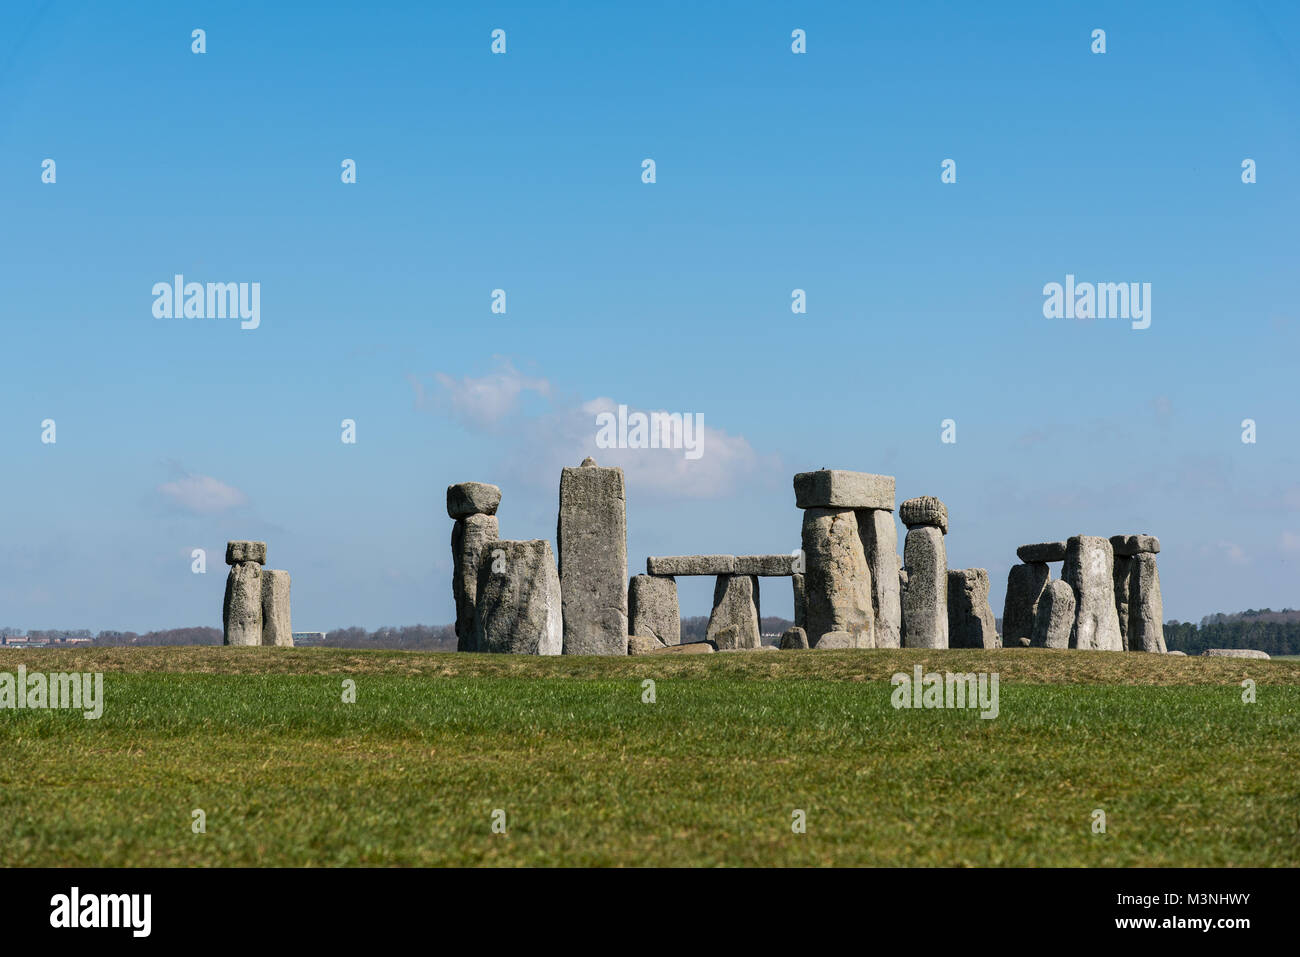 Stonehenge, Wiltshire - view across grass fields of the stone circles on a quiet day with no visitors - space for captioning Stock Photo